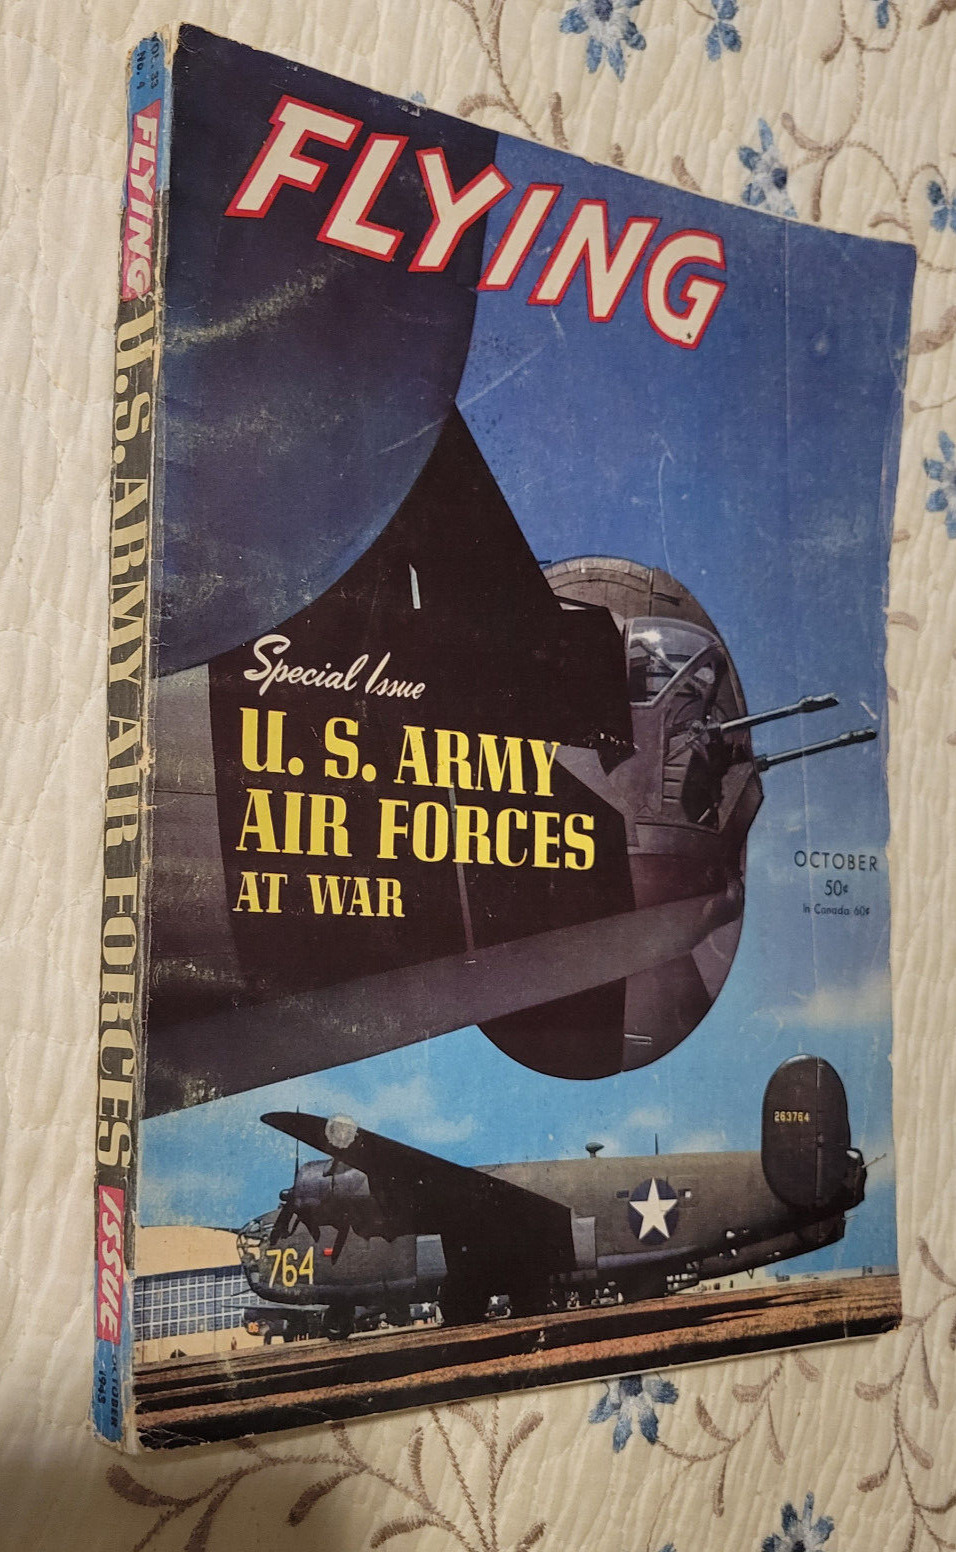 Flying Magazine, Oct 1943, US Army Air Forces at War Very Good Condition